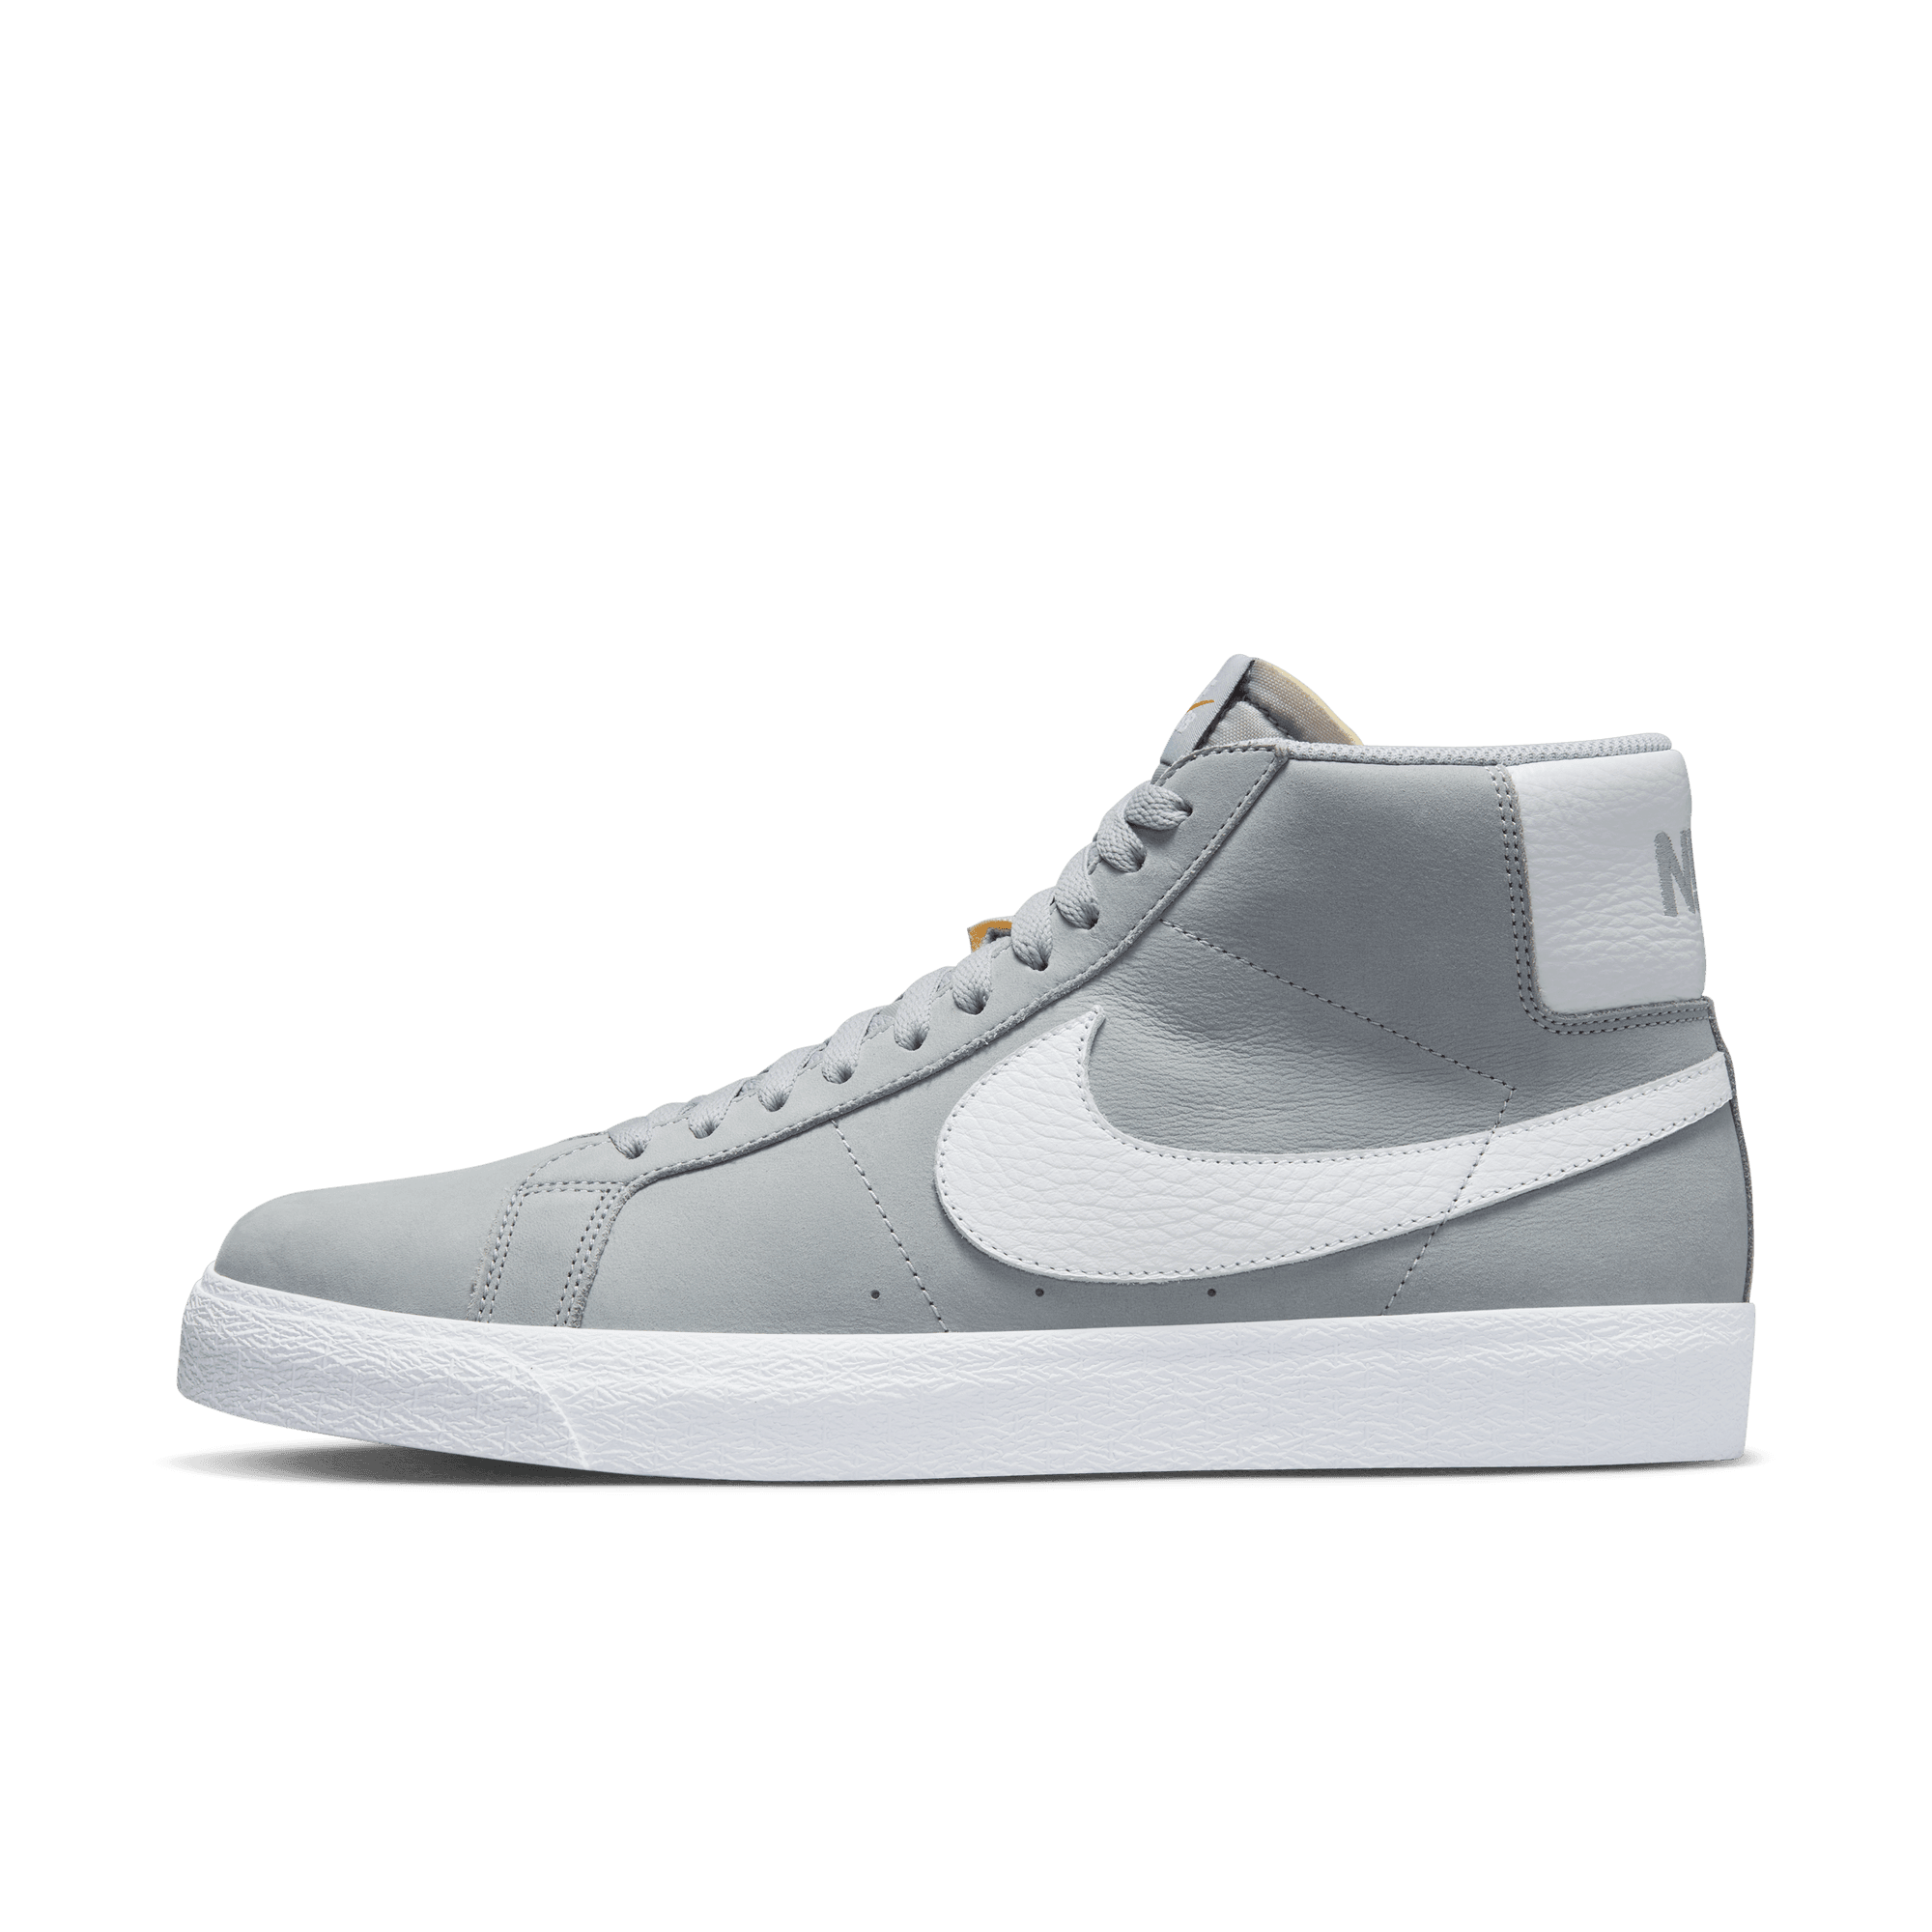 SB Zoom Mid ISO Wolf Grey/White - Orchard